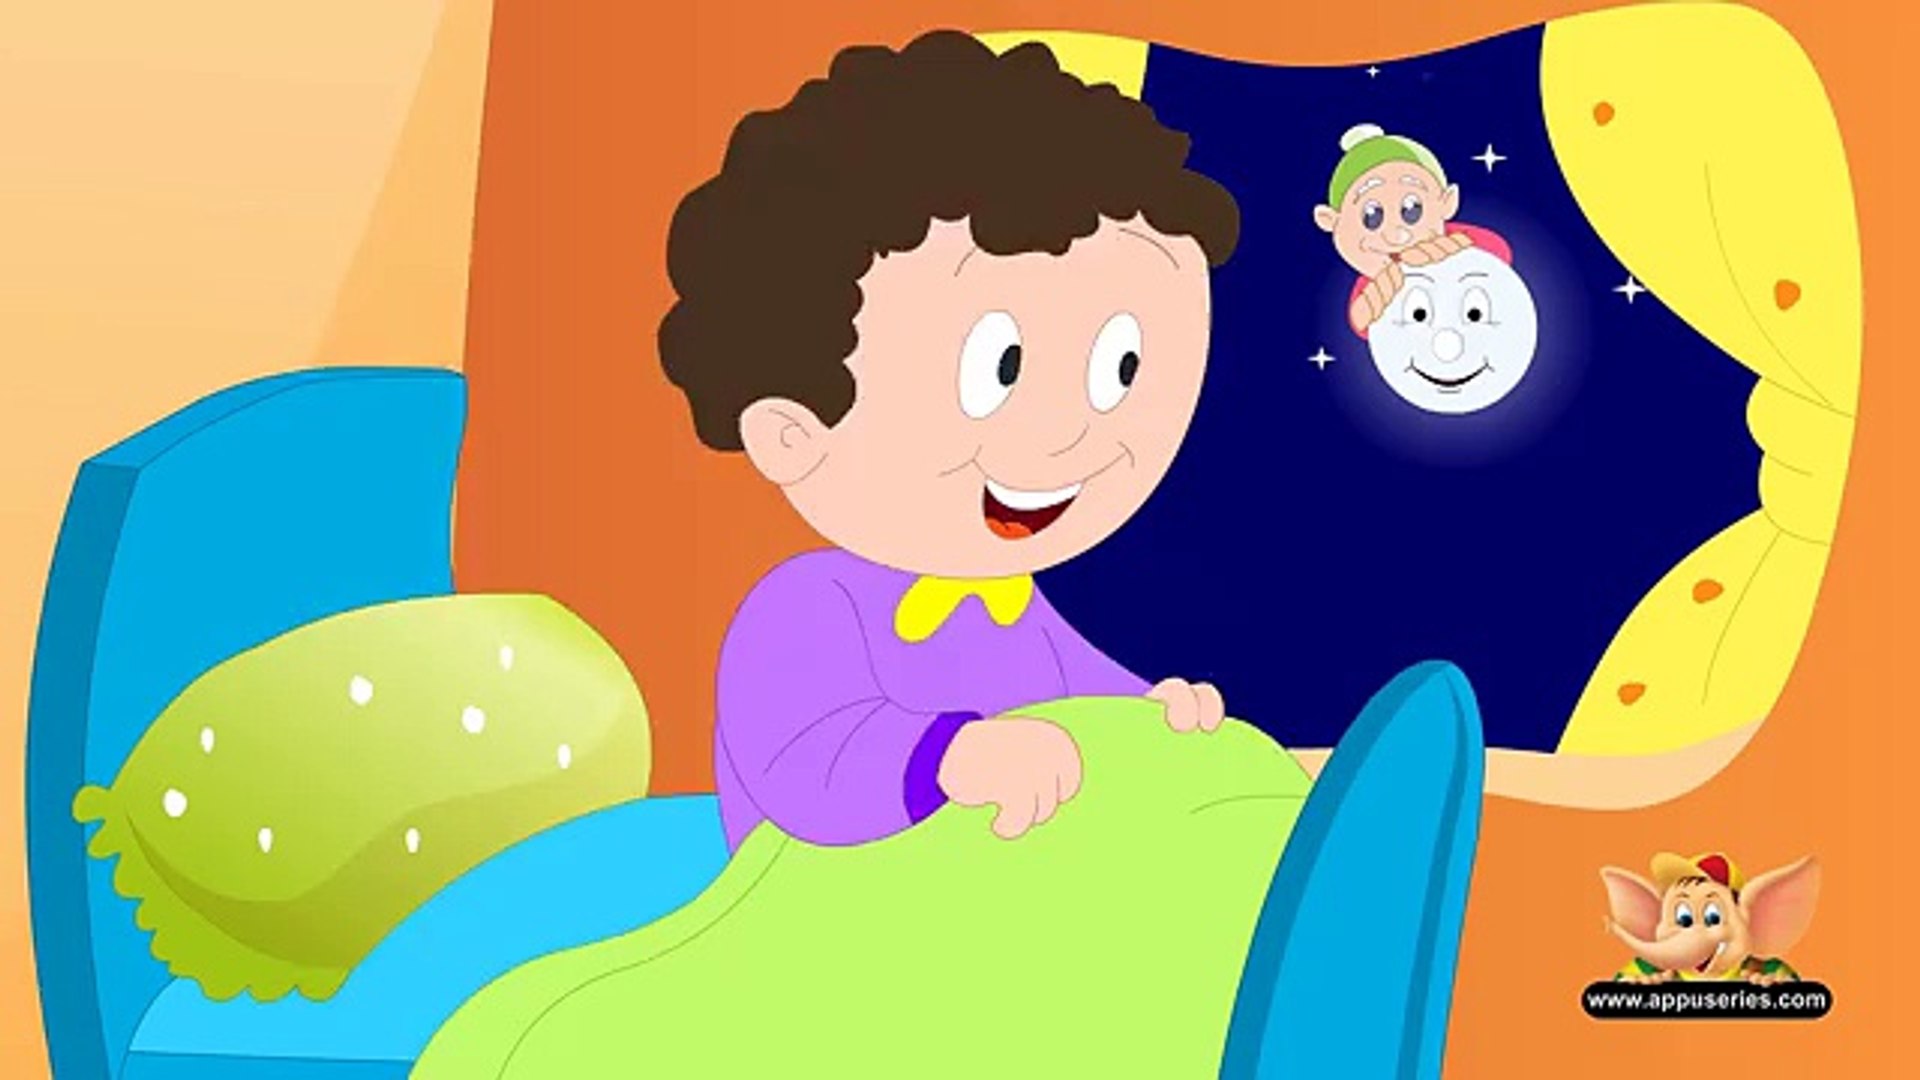 The Man in the Moon - Nursery Rhyme (HD) Hindi Urdu Famous Nursery Rhymes  for kids-Ten best Nursery Rhymes-English Phonic Songs-ABC Songs For  children-Animated Alphabet Poems for Kids-Baby HD cartoons-Best Learning HD